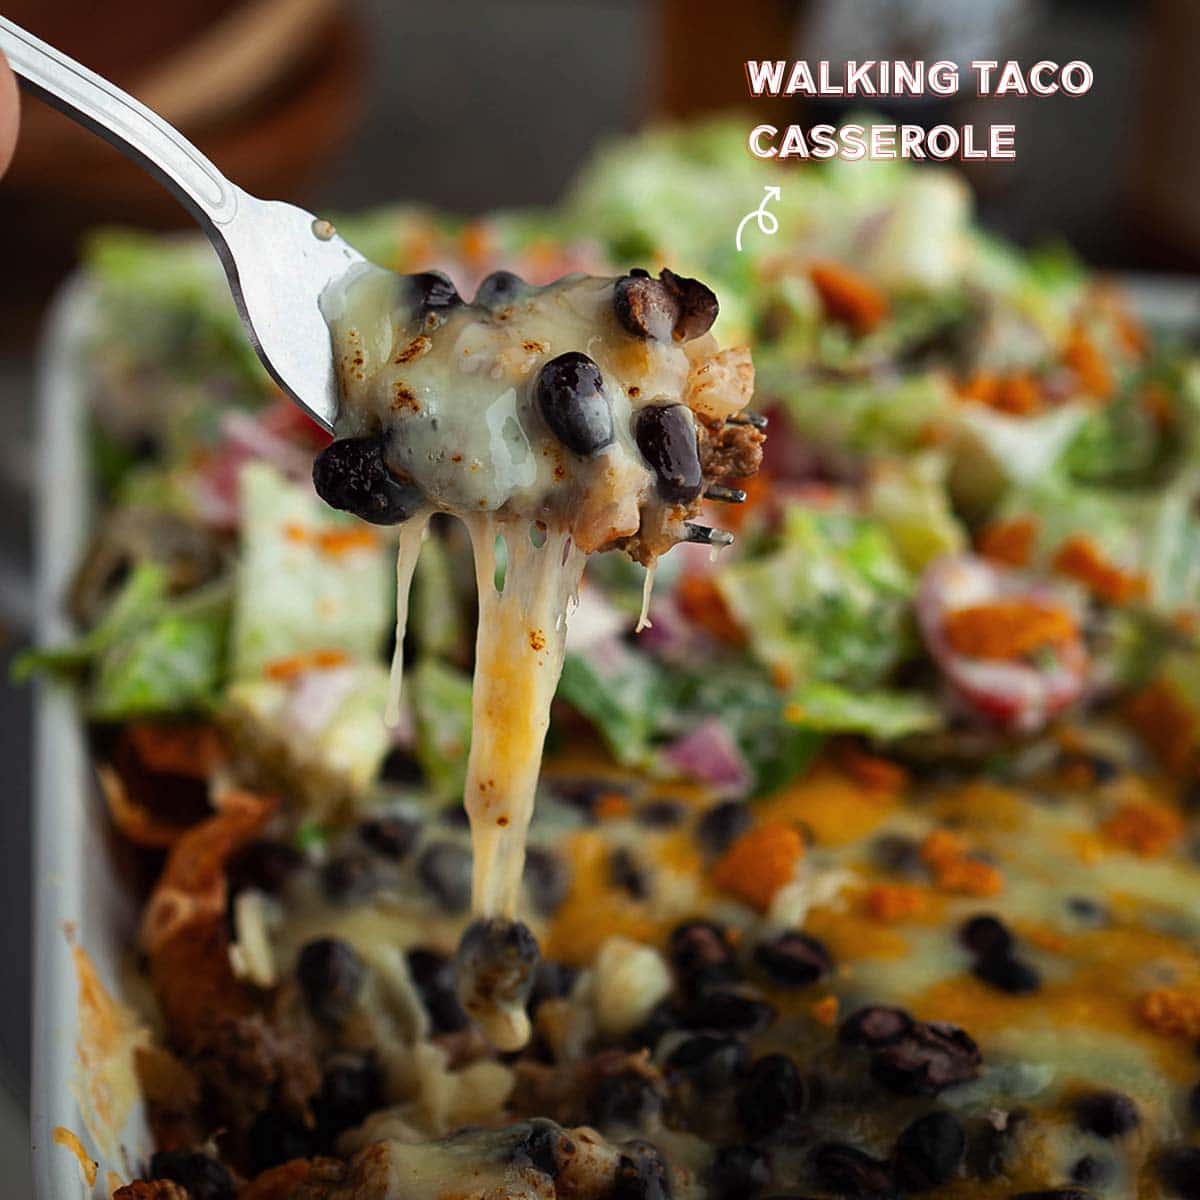 For this walking taco recipe, I love using crunchy Frito corn chips. It puts “walking” in this walking taco meat casserole. My kids love it! They even eat all the black beans and meat that I bake with a thick layer of cheddar.